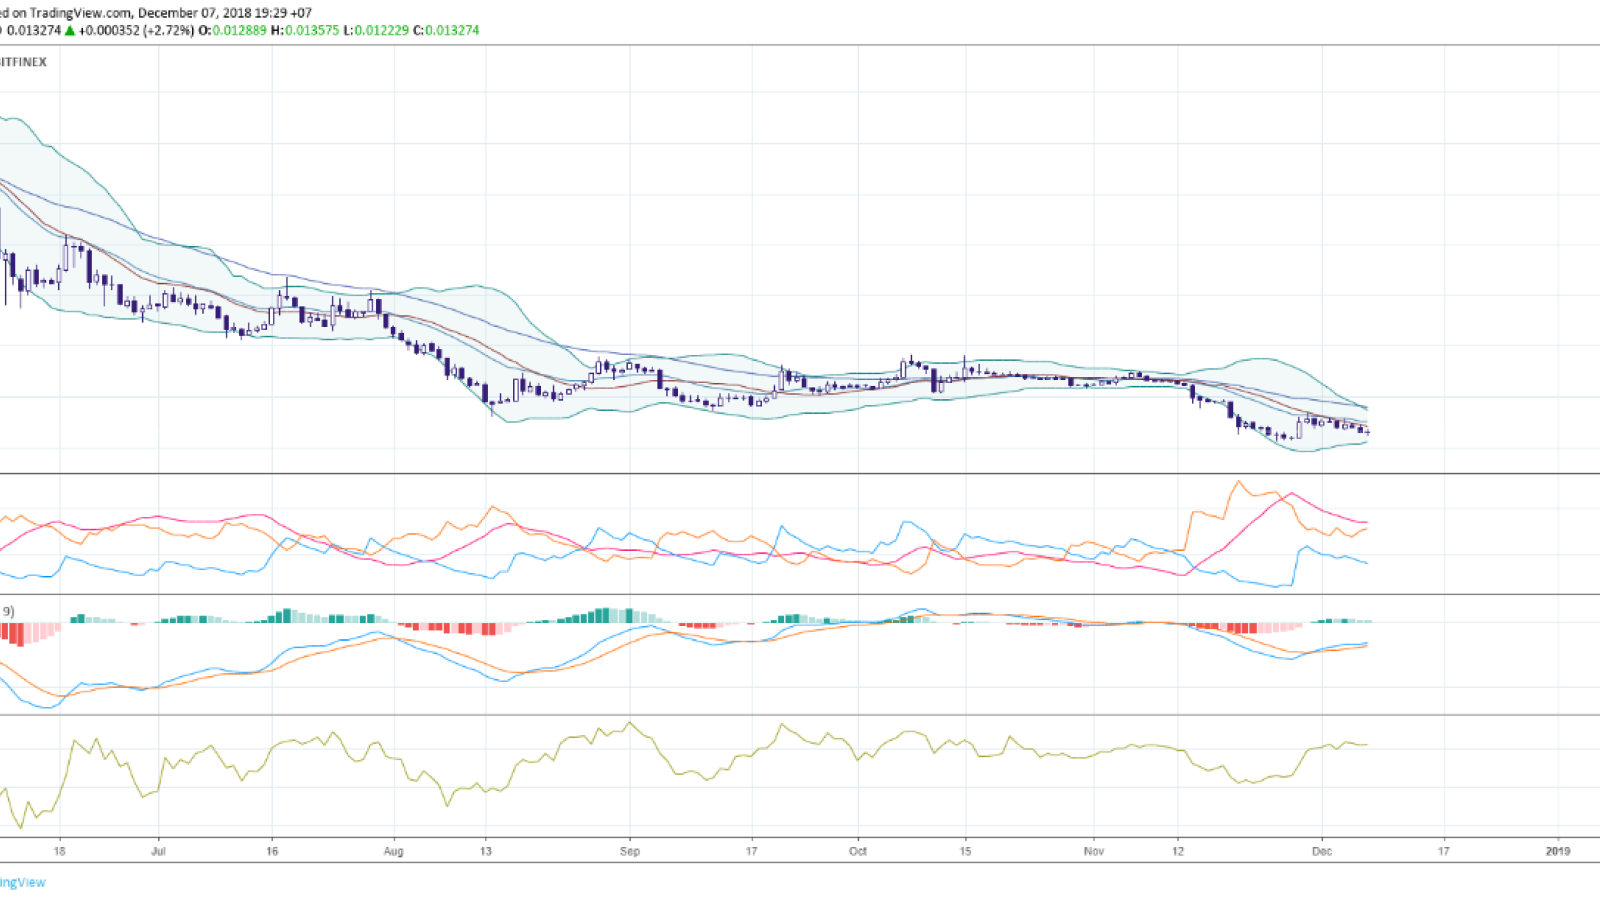 Tron daily chart